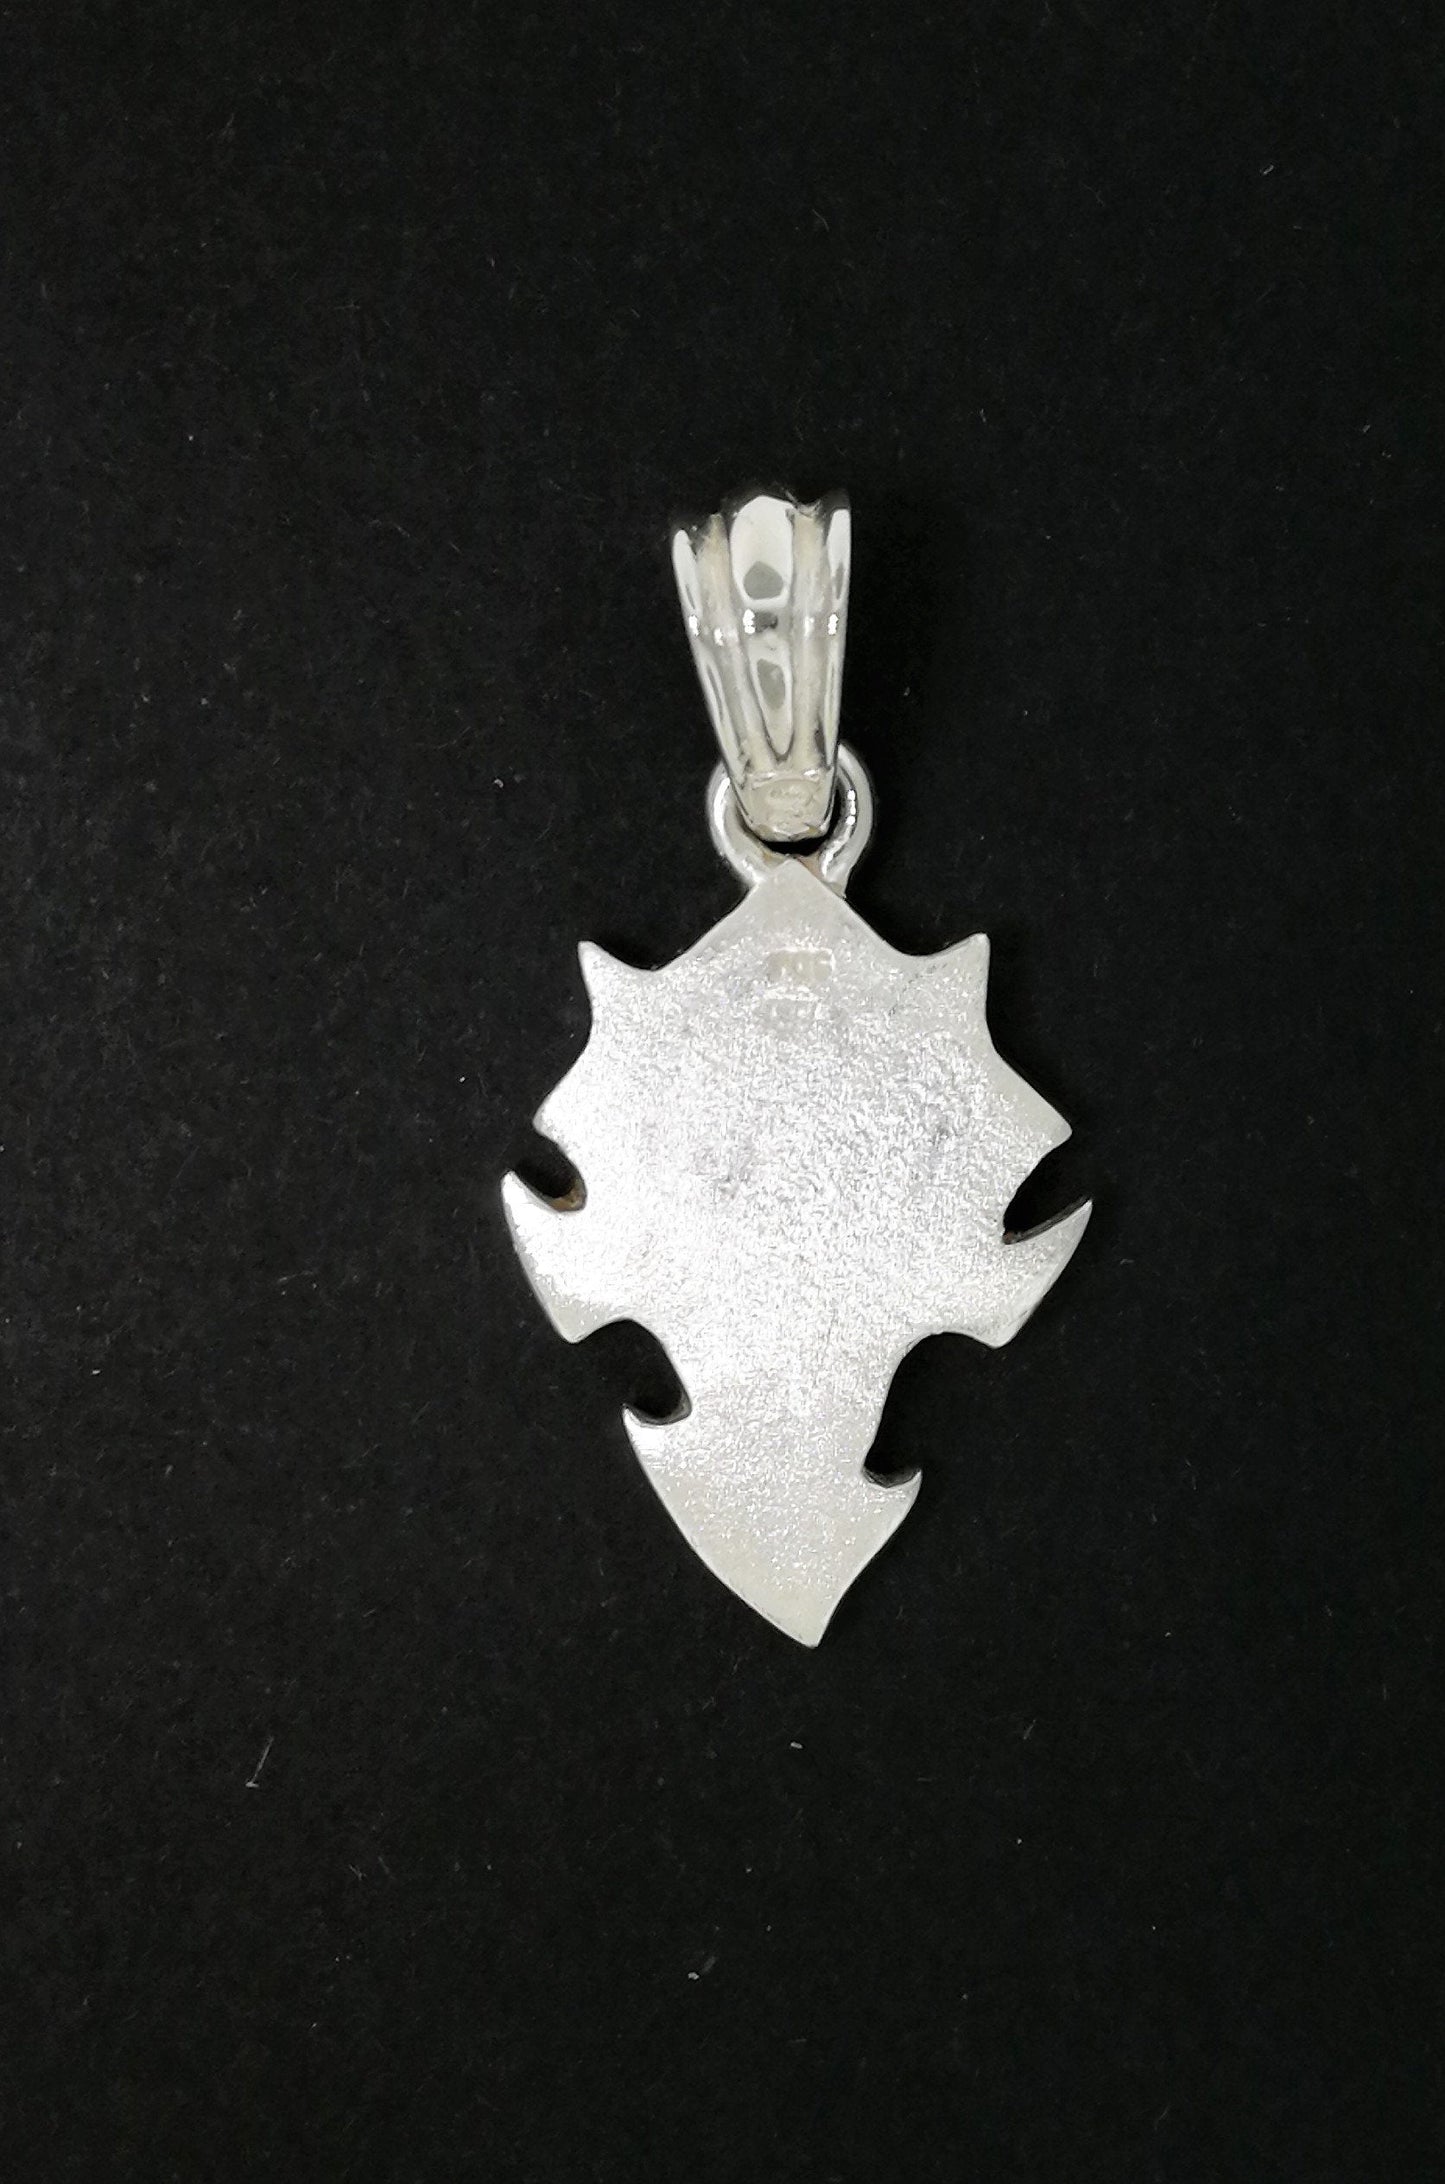 Horde pendant in Sterling Silver or Antique Bronze, Silver Harde Pendant, Bronze Horde Pendant, Silver WOW Pendant, Bronze WOW Pendant, Silver Hoard Pendant, Silver Gamer Pendant, Bronze Gamer Pendant, Silver Gamer Jewelry, Silver Gamer Jewellery, World of Warcraft Jewelry, World of Warcraft Jewellery, Silver WOW Pendant, Silver WOW Jewelry, Bronze WOW Jewelry